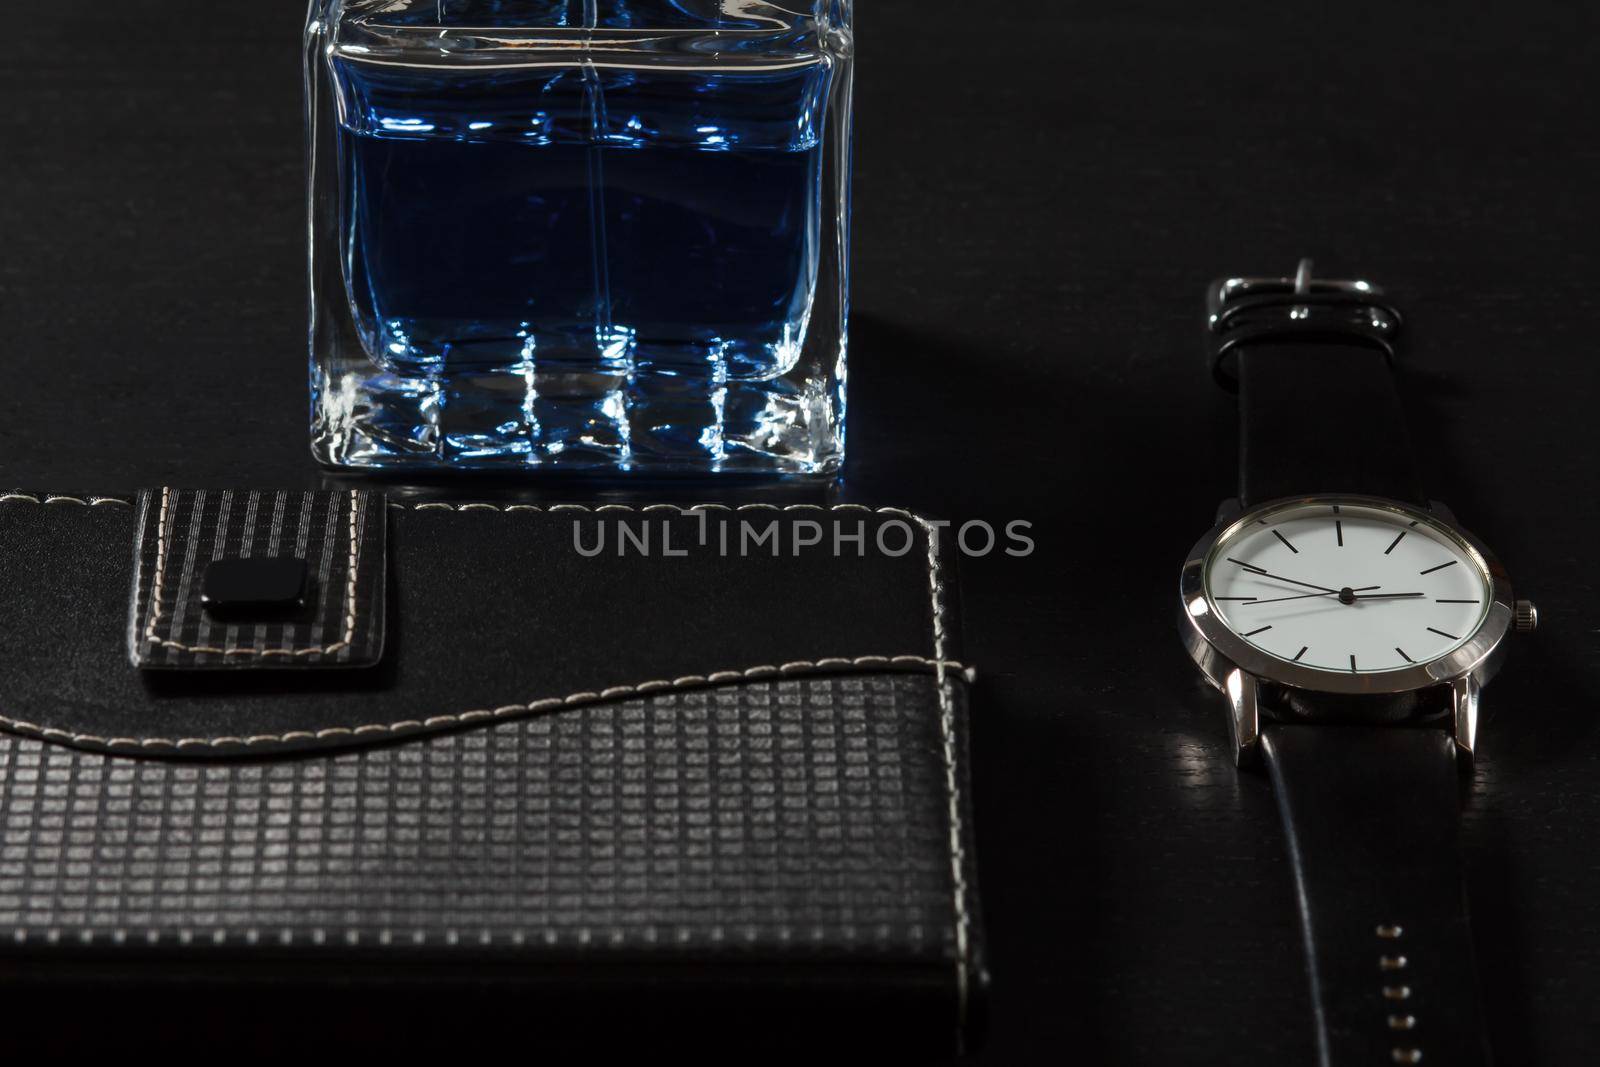 Man perfume, watch with a leather strap, notebook in leather cover on a black background